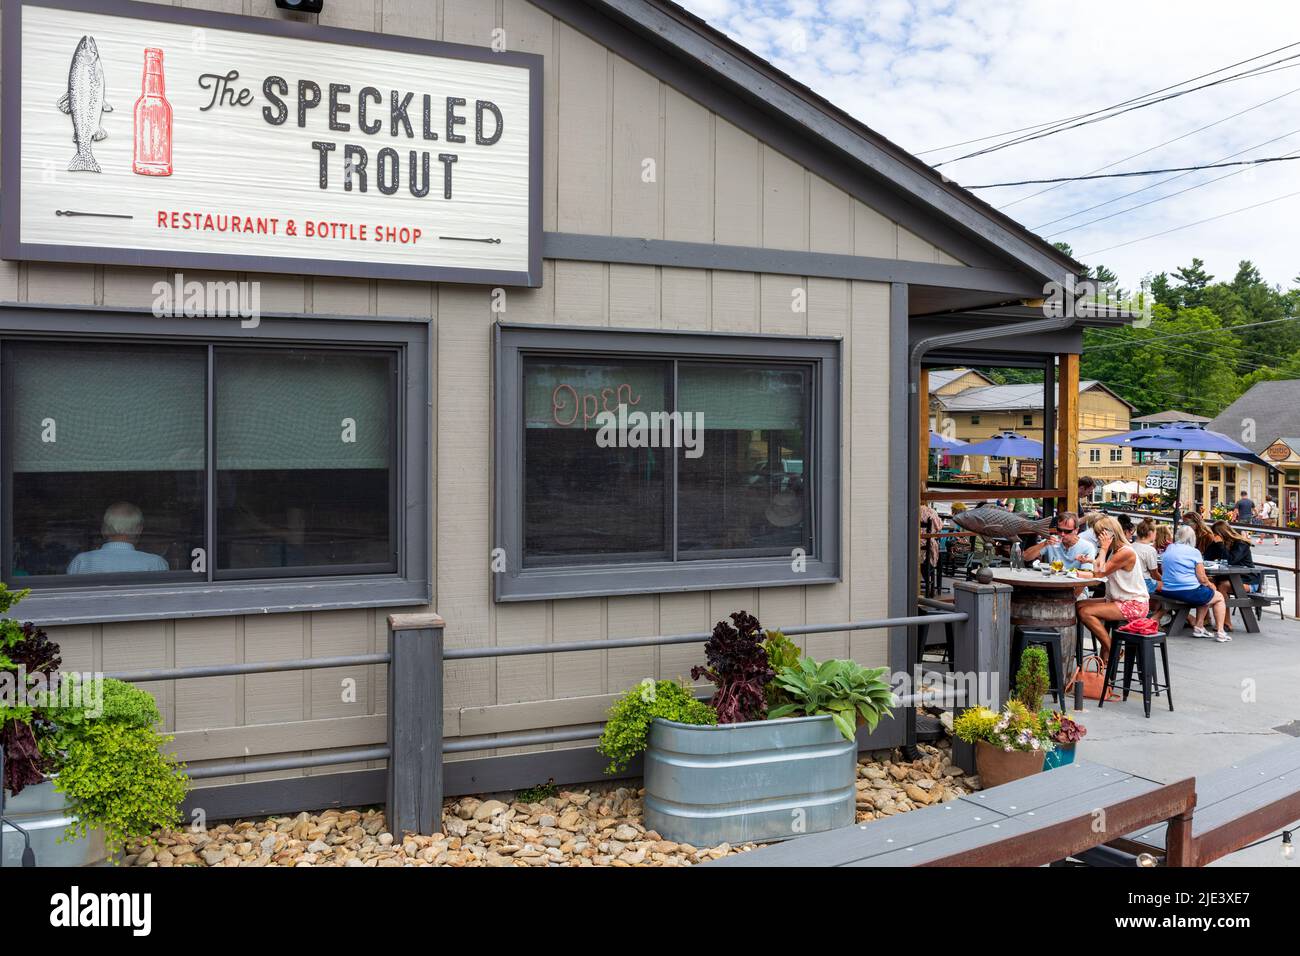 BLOWING ROCK, NC, USA-20 JUNE 2022: The Speckled Trout Restaurant and Bottle shop, with outside dining.  Building, sign and customers. Stock Photo